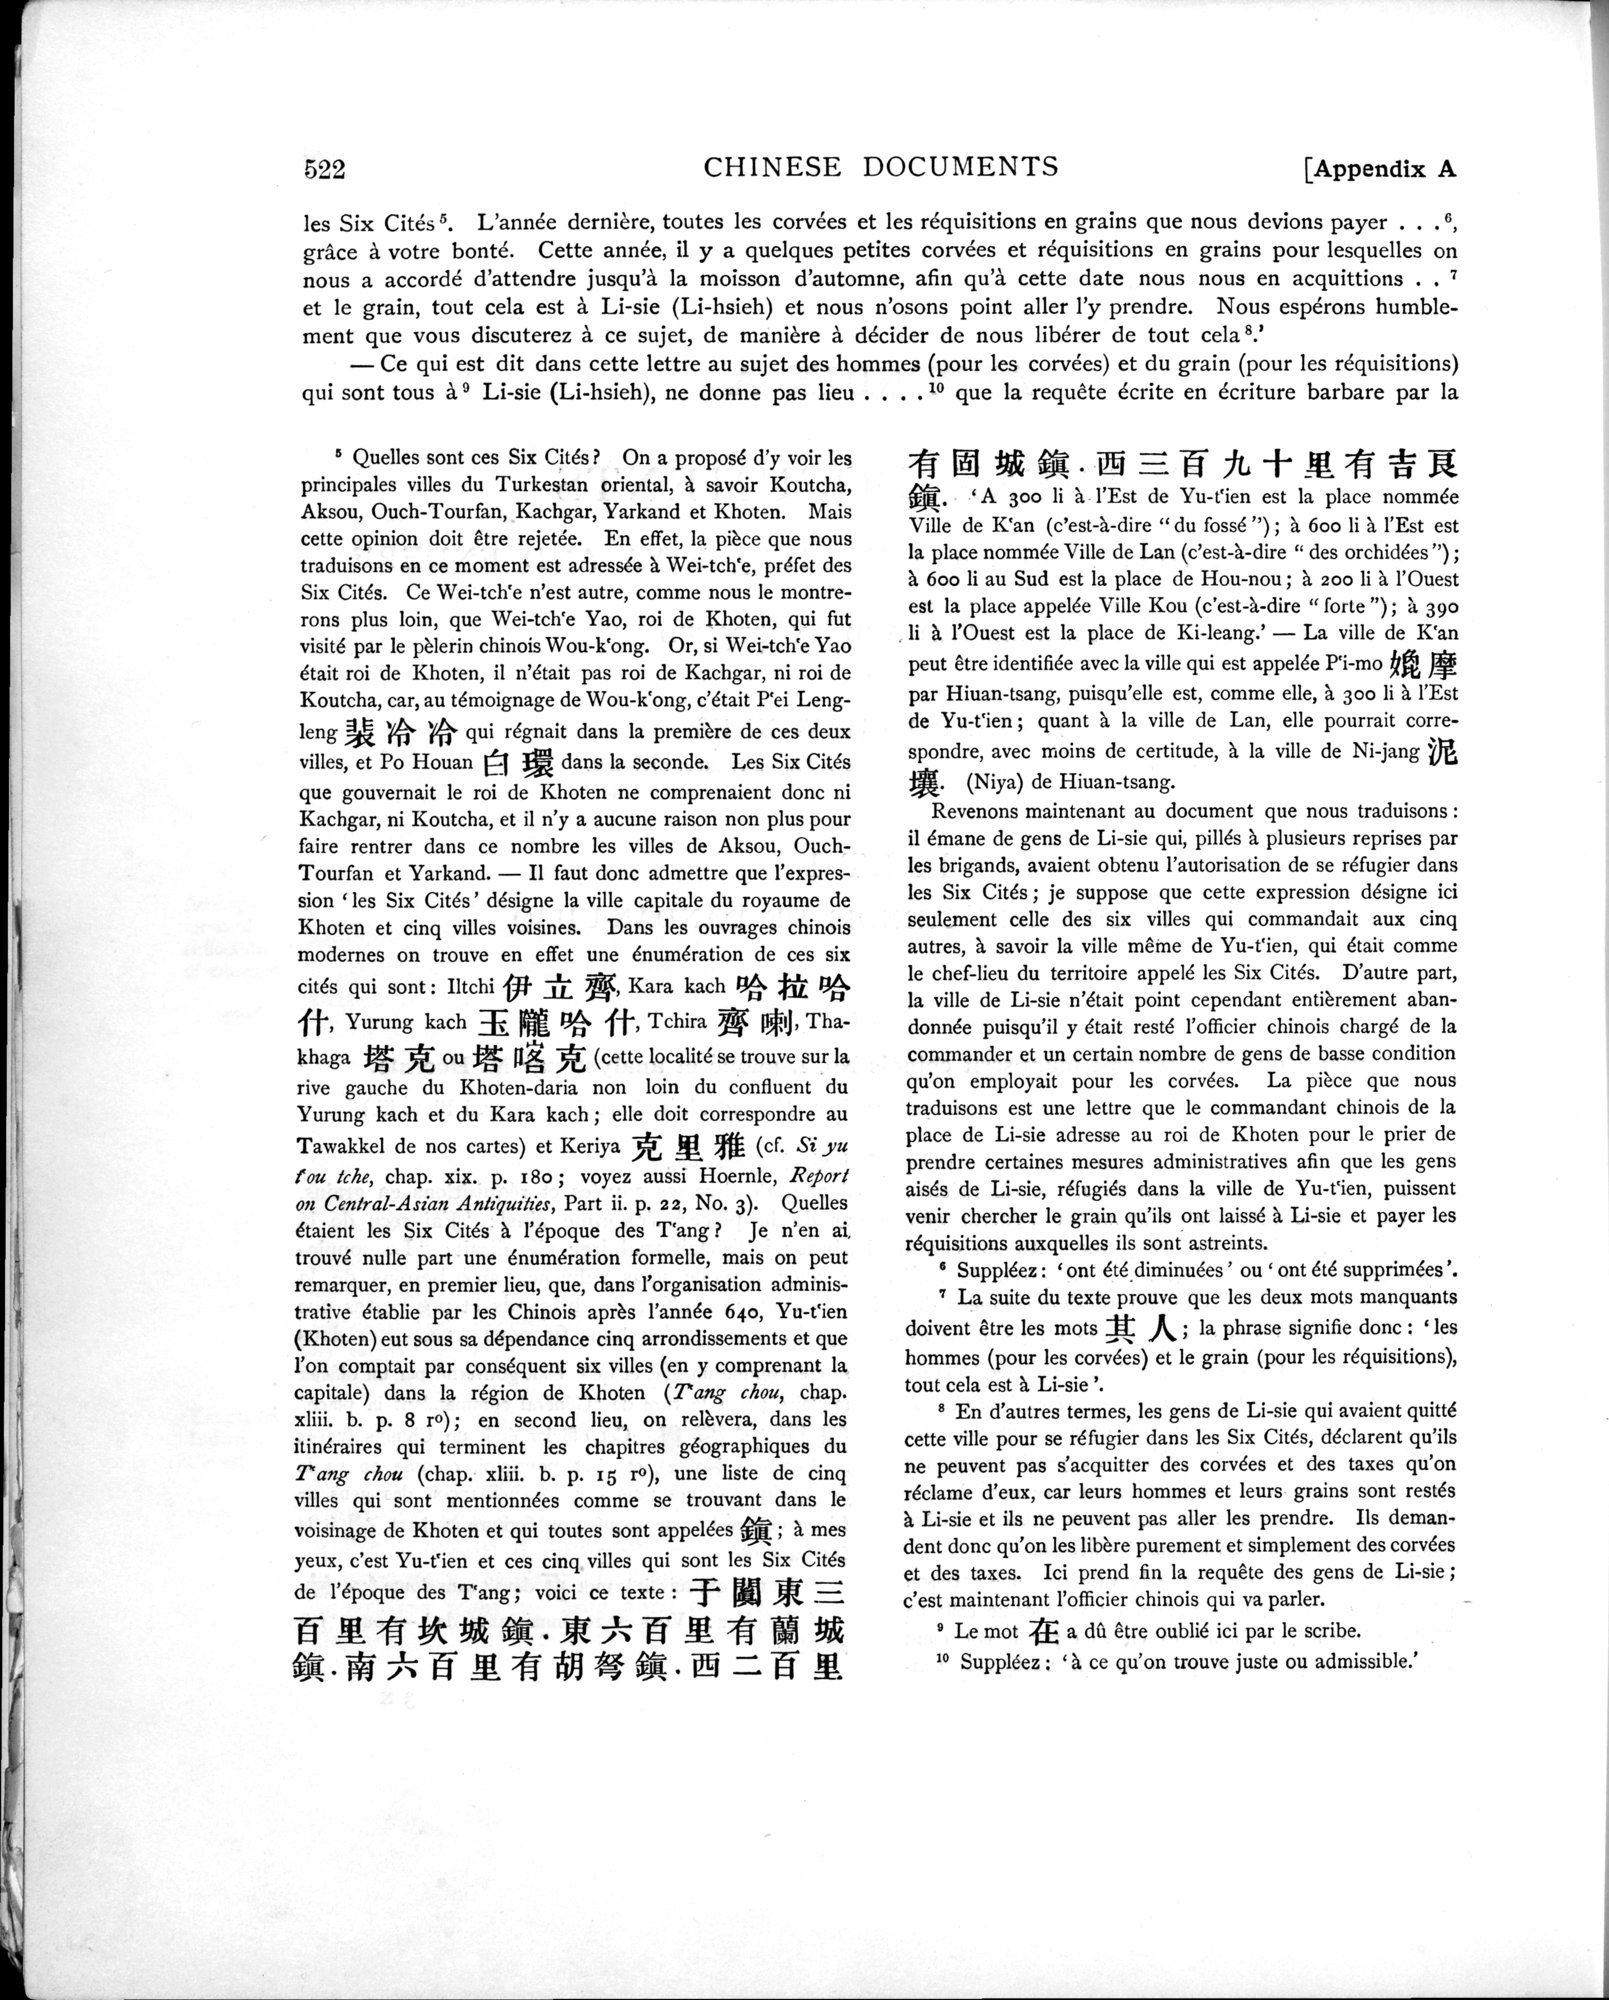 Ancient Khotan : vol.1 / Page 618 (Grayscale High Resolution Image)